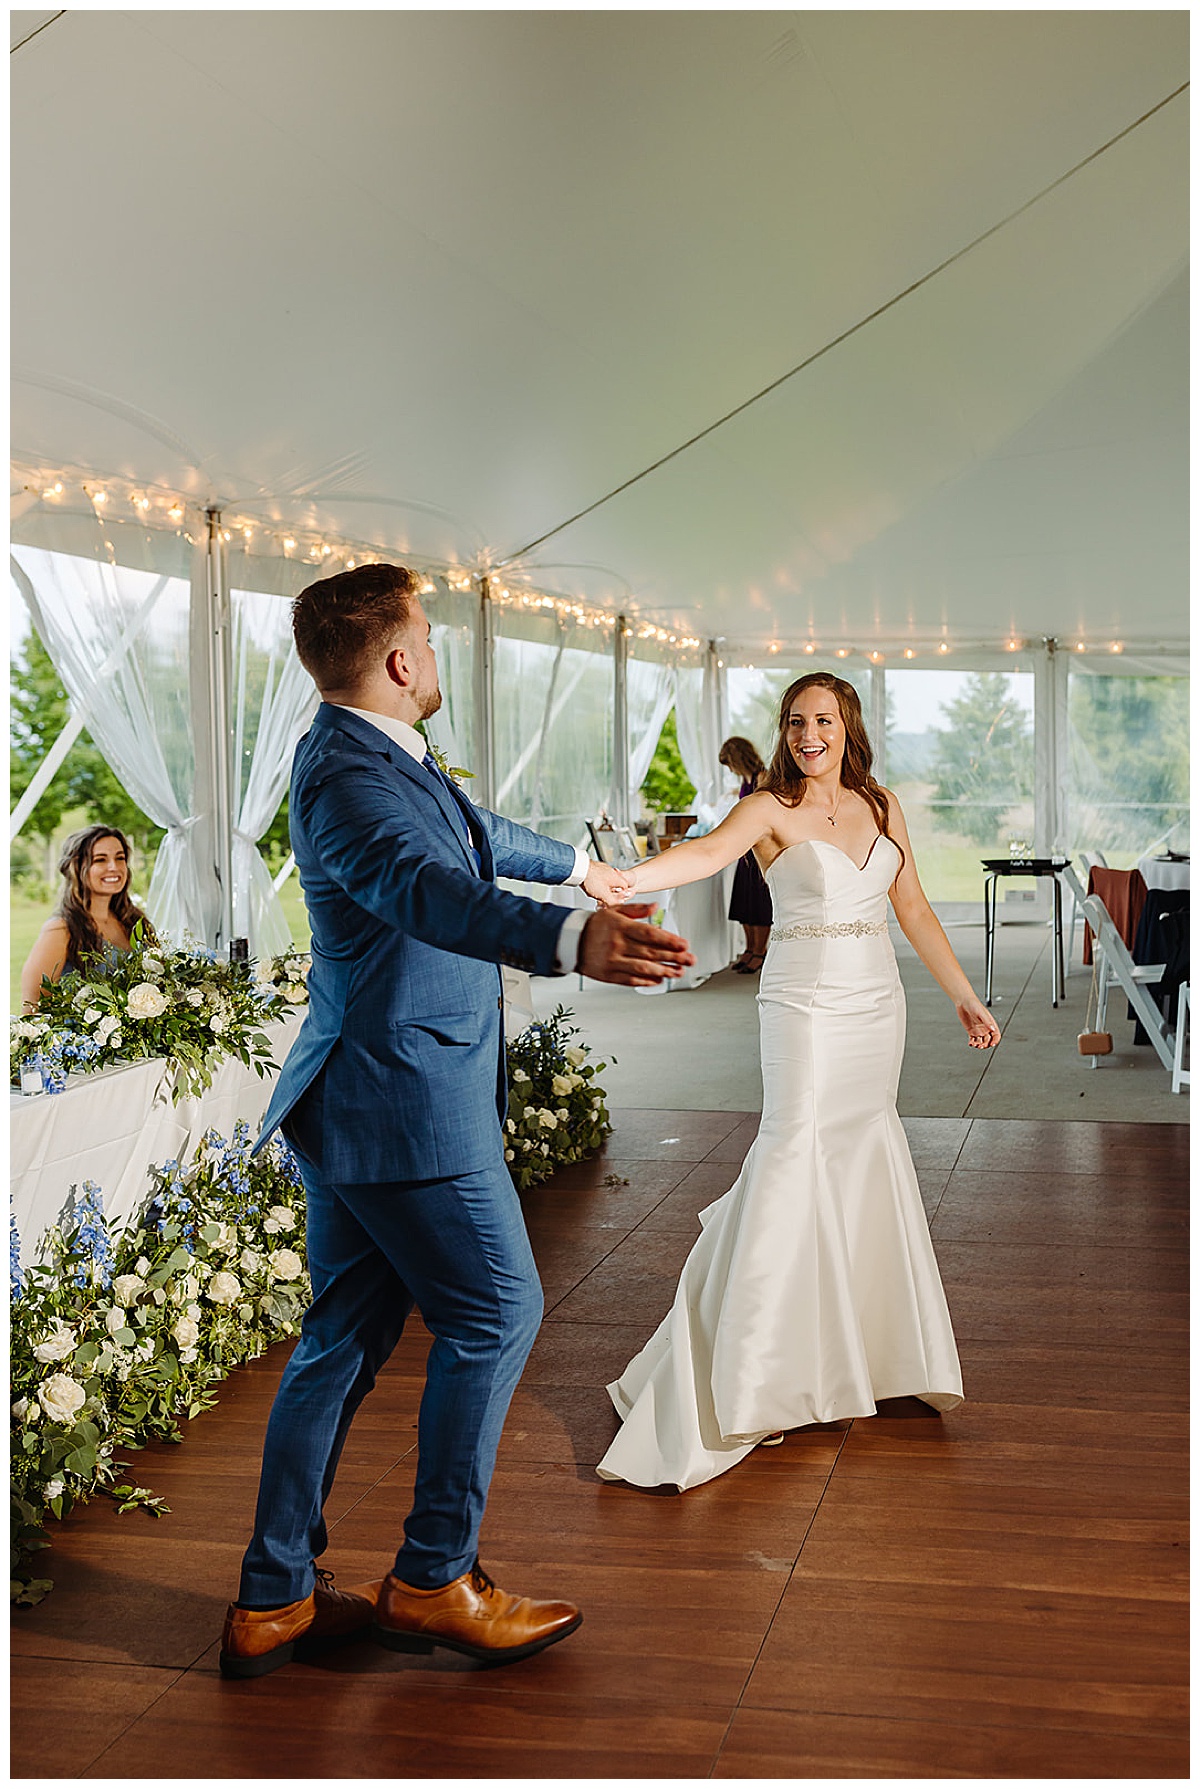 Woman smiles at man while dancing for Detroit Wedding Photographer